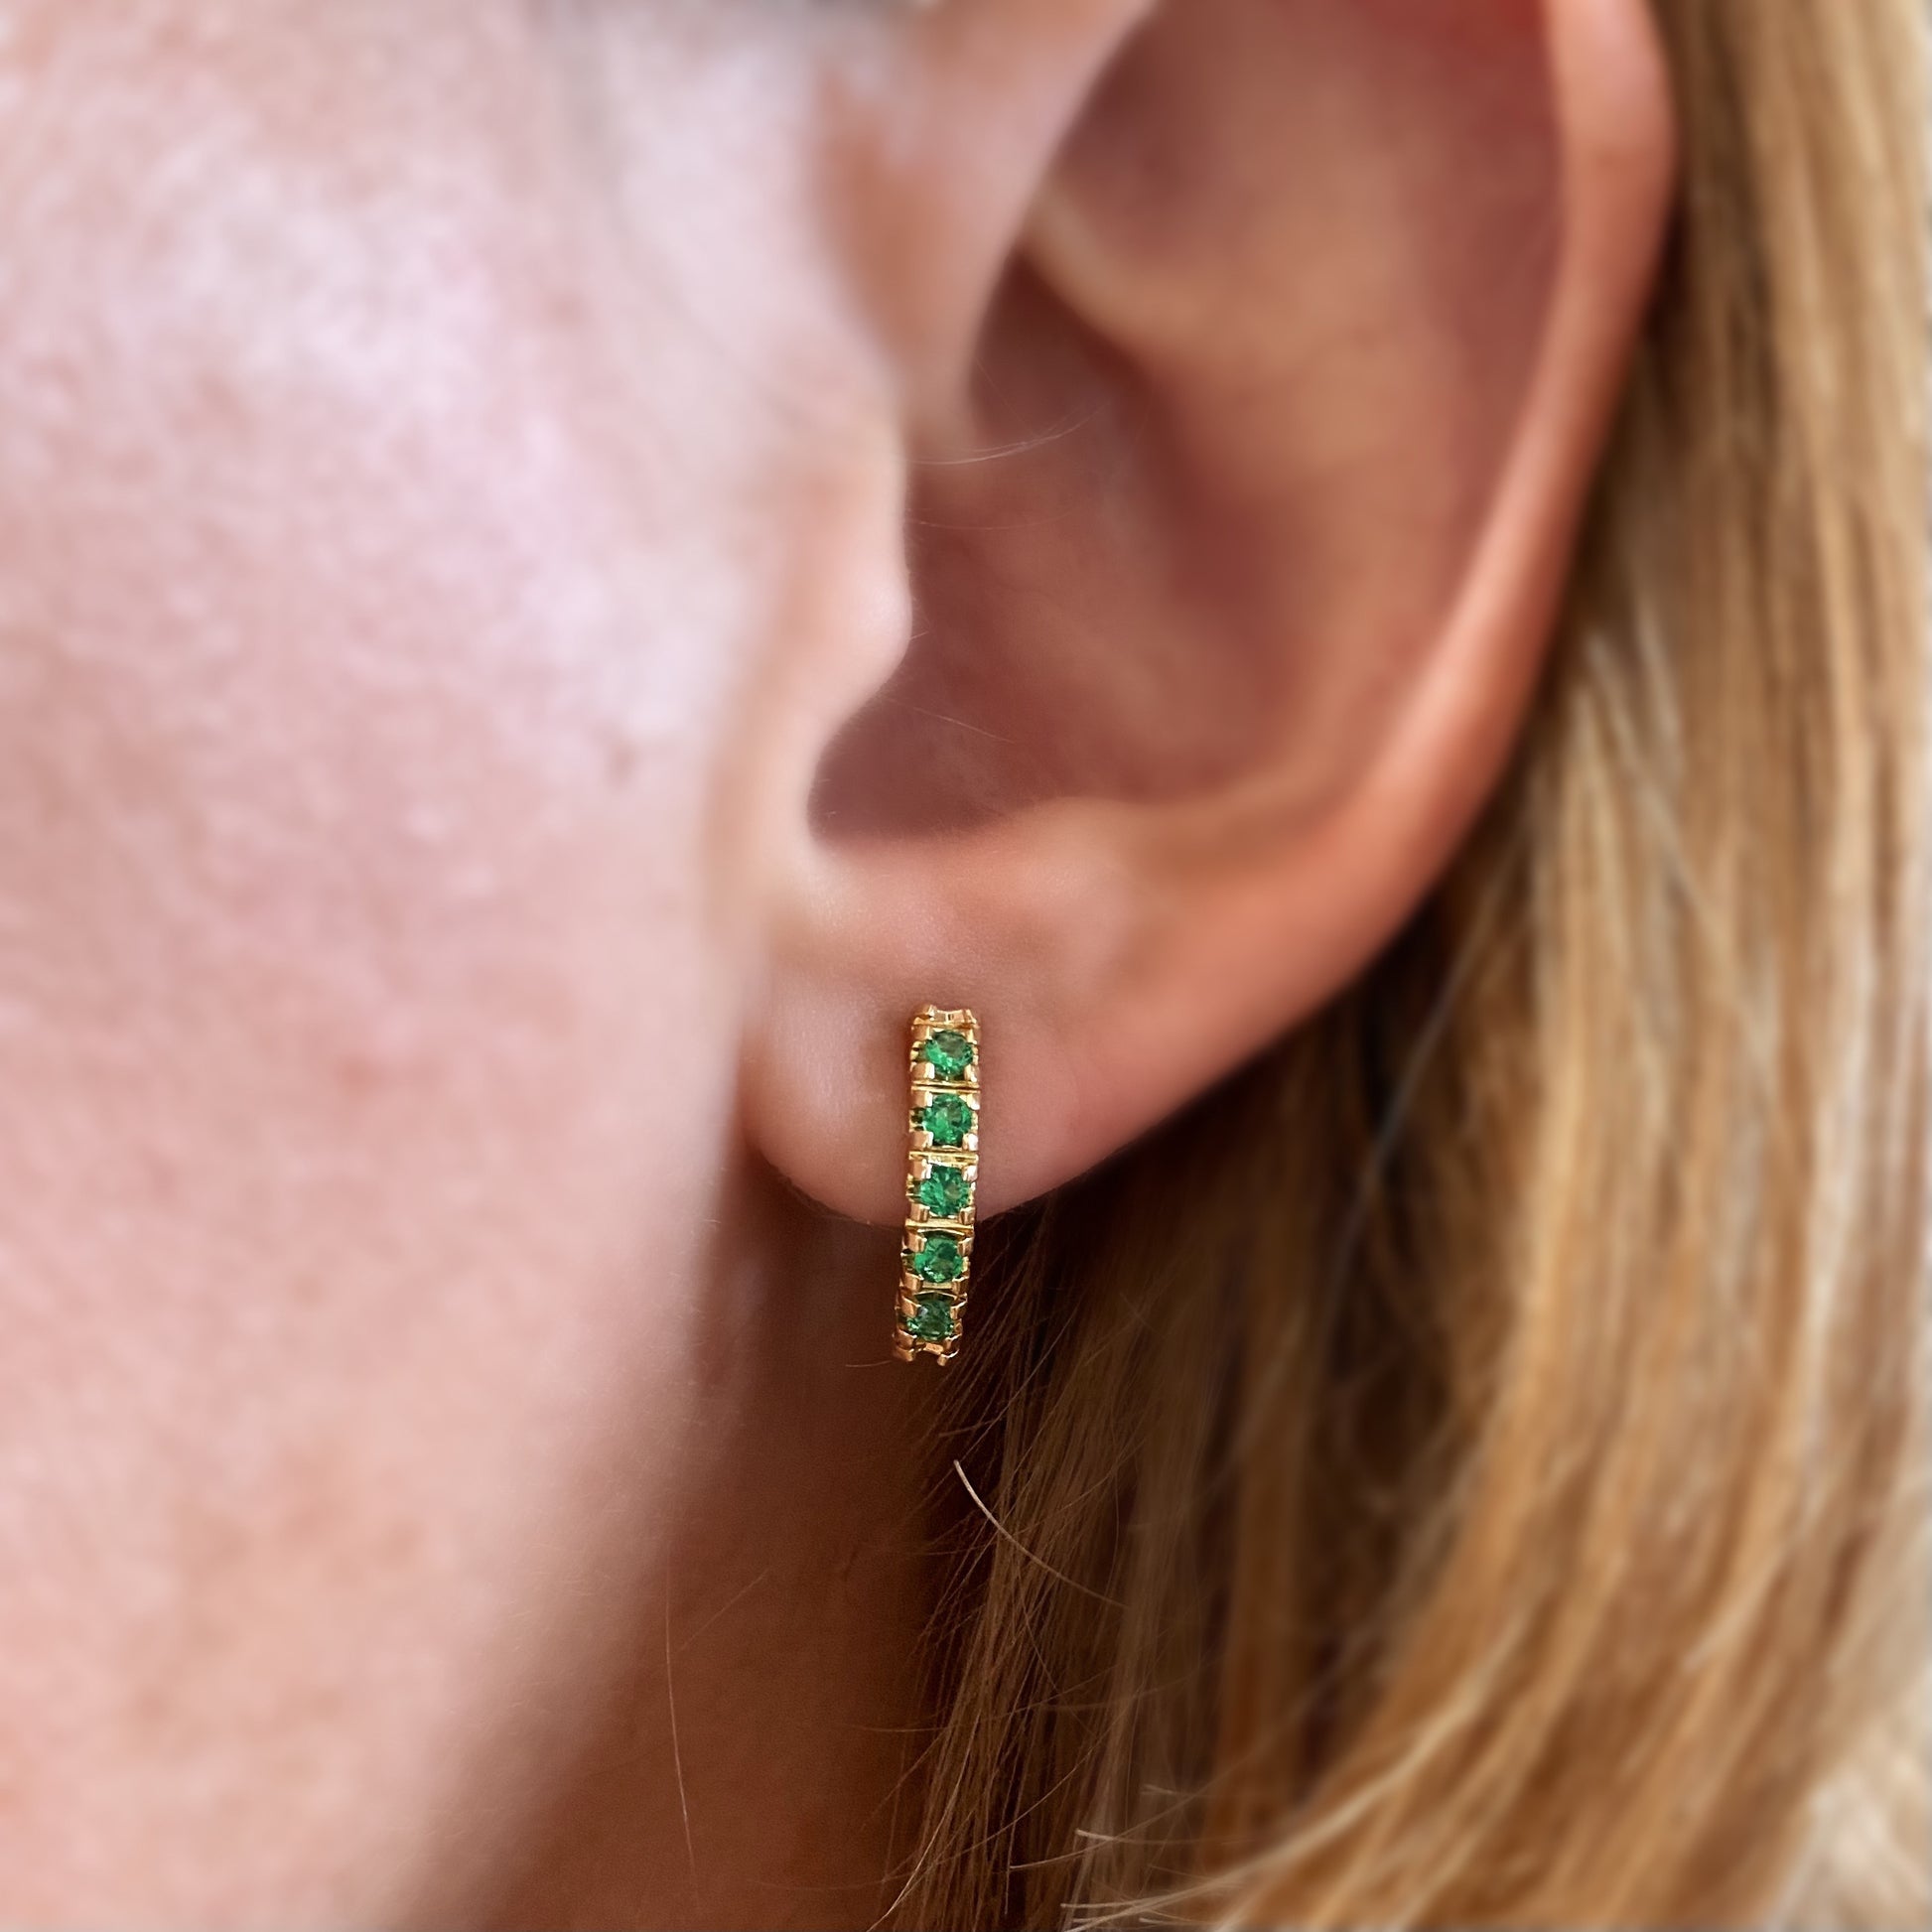 GoldFi 18k Gold Filled Curved Bar Emerald Green Crystal Stud Earrings